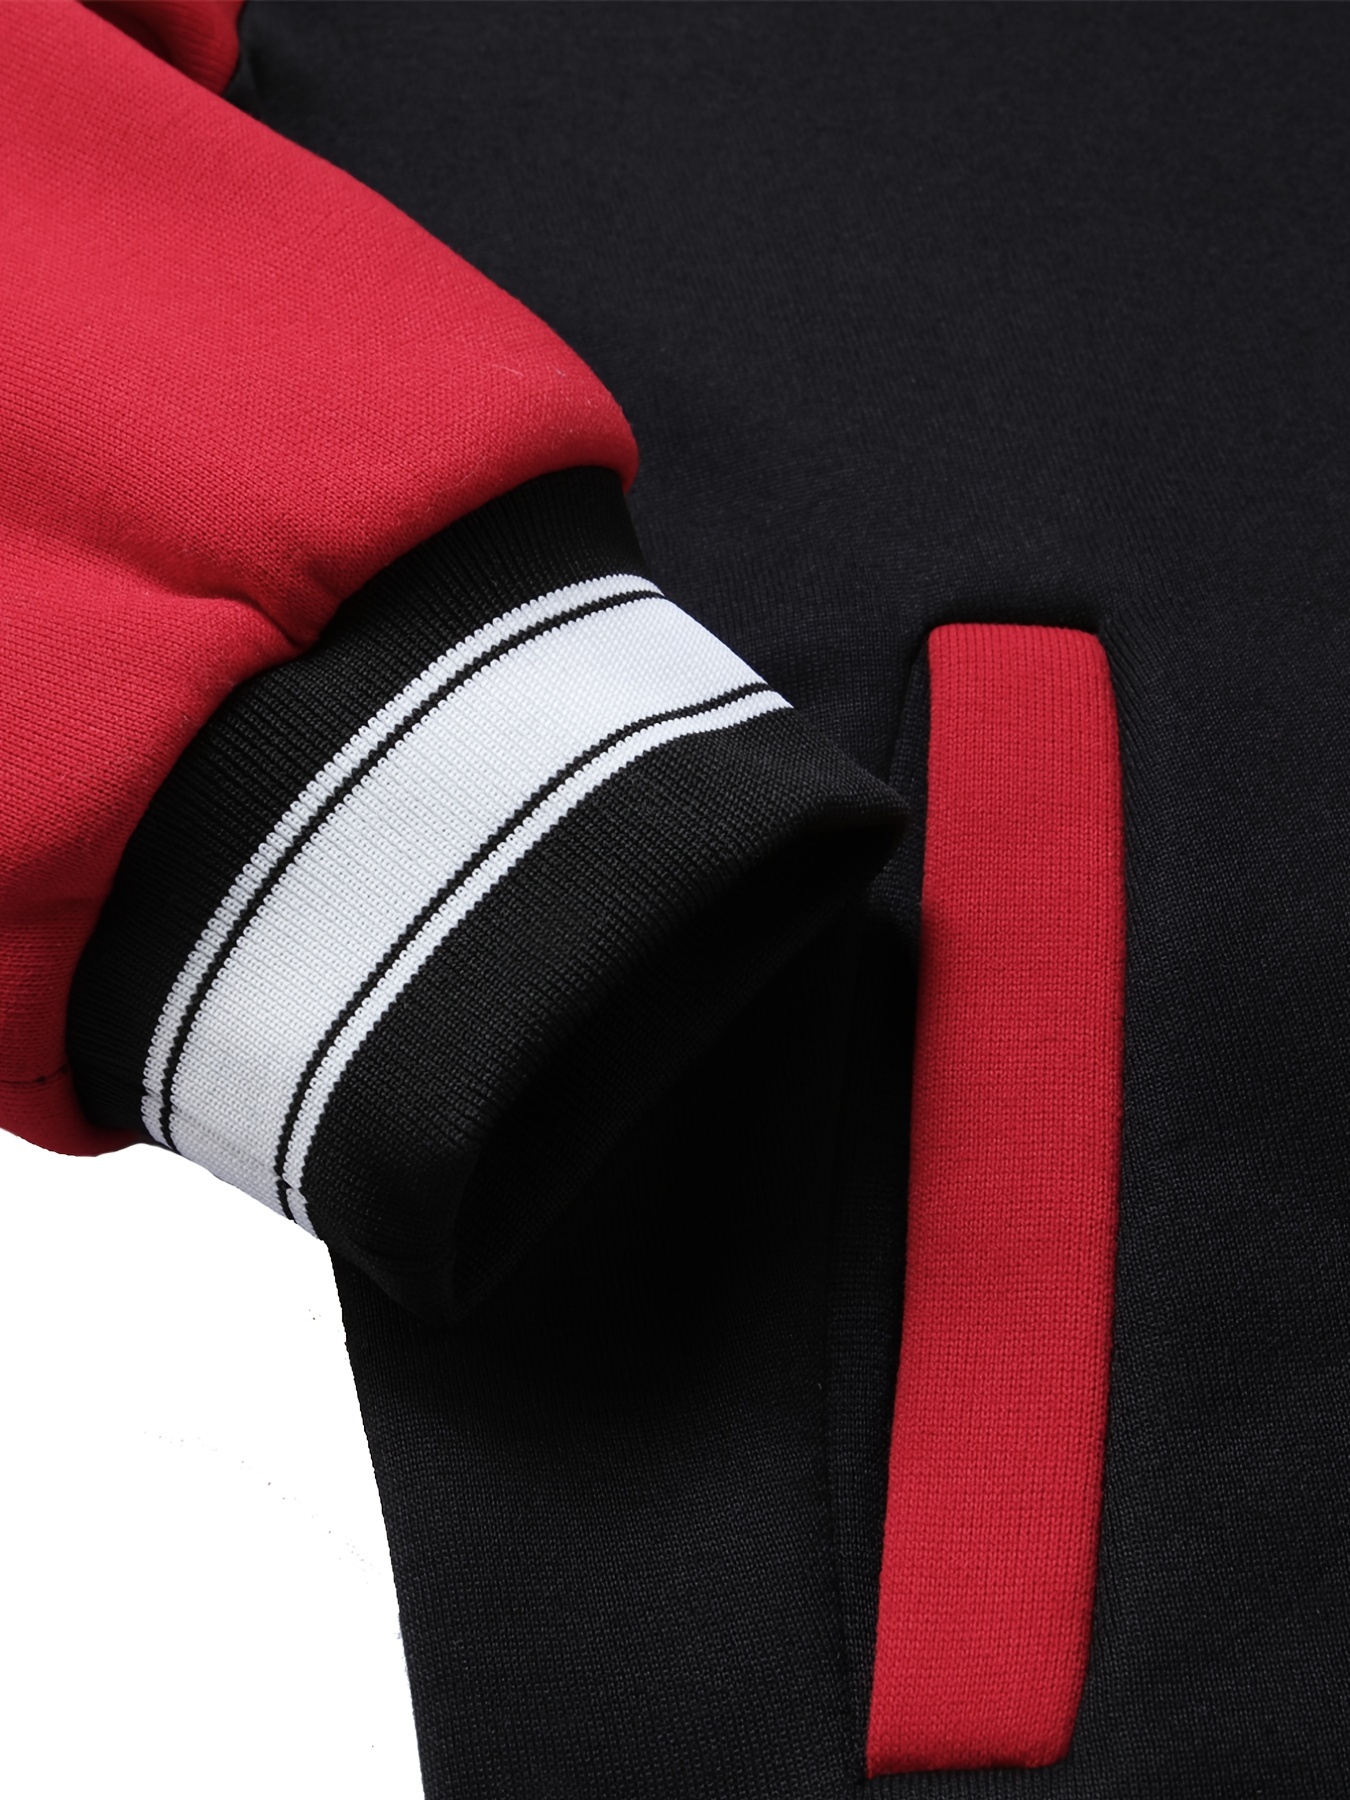 Fleece Lightweight Baseball Collar Varsity Jackets, Men's Letter Graphic Pocket Print Trendy Color Block Thermal Outerwear Clothes Fall Winter